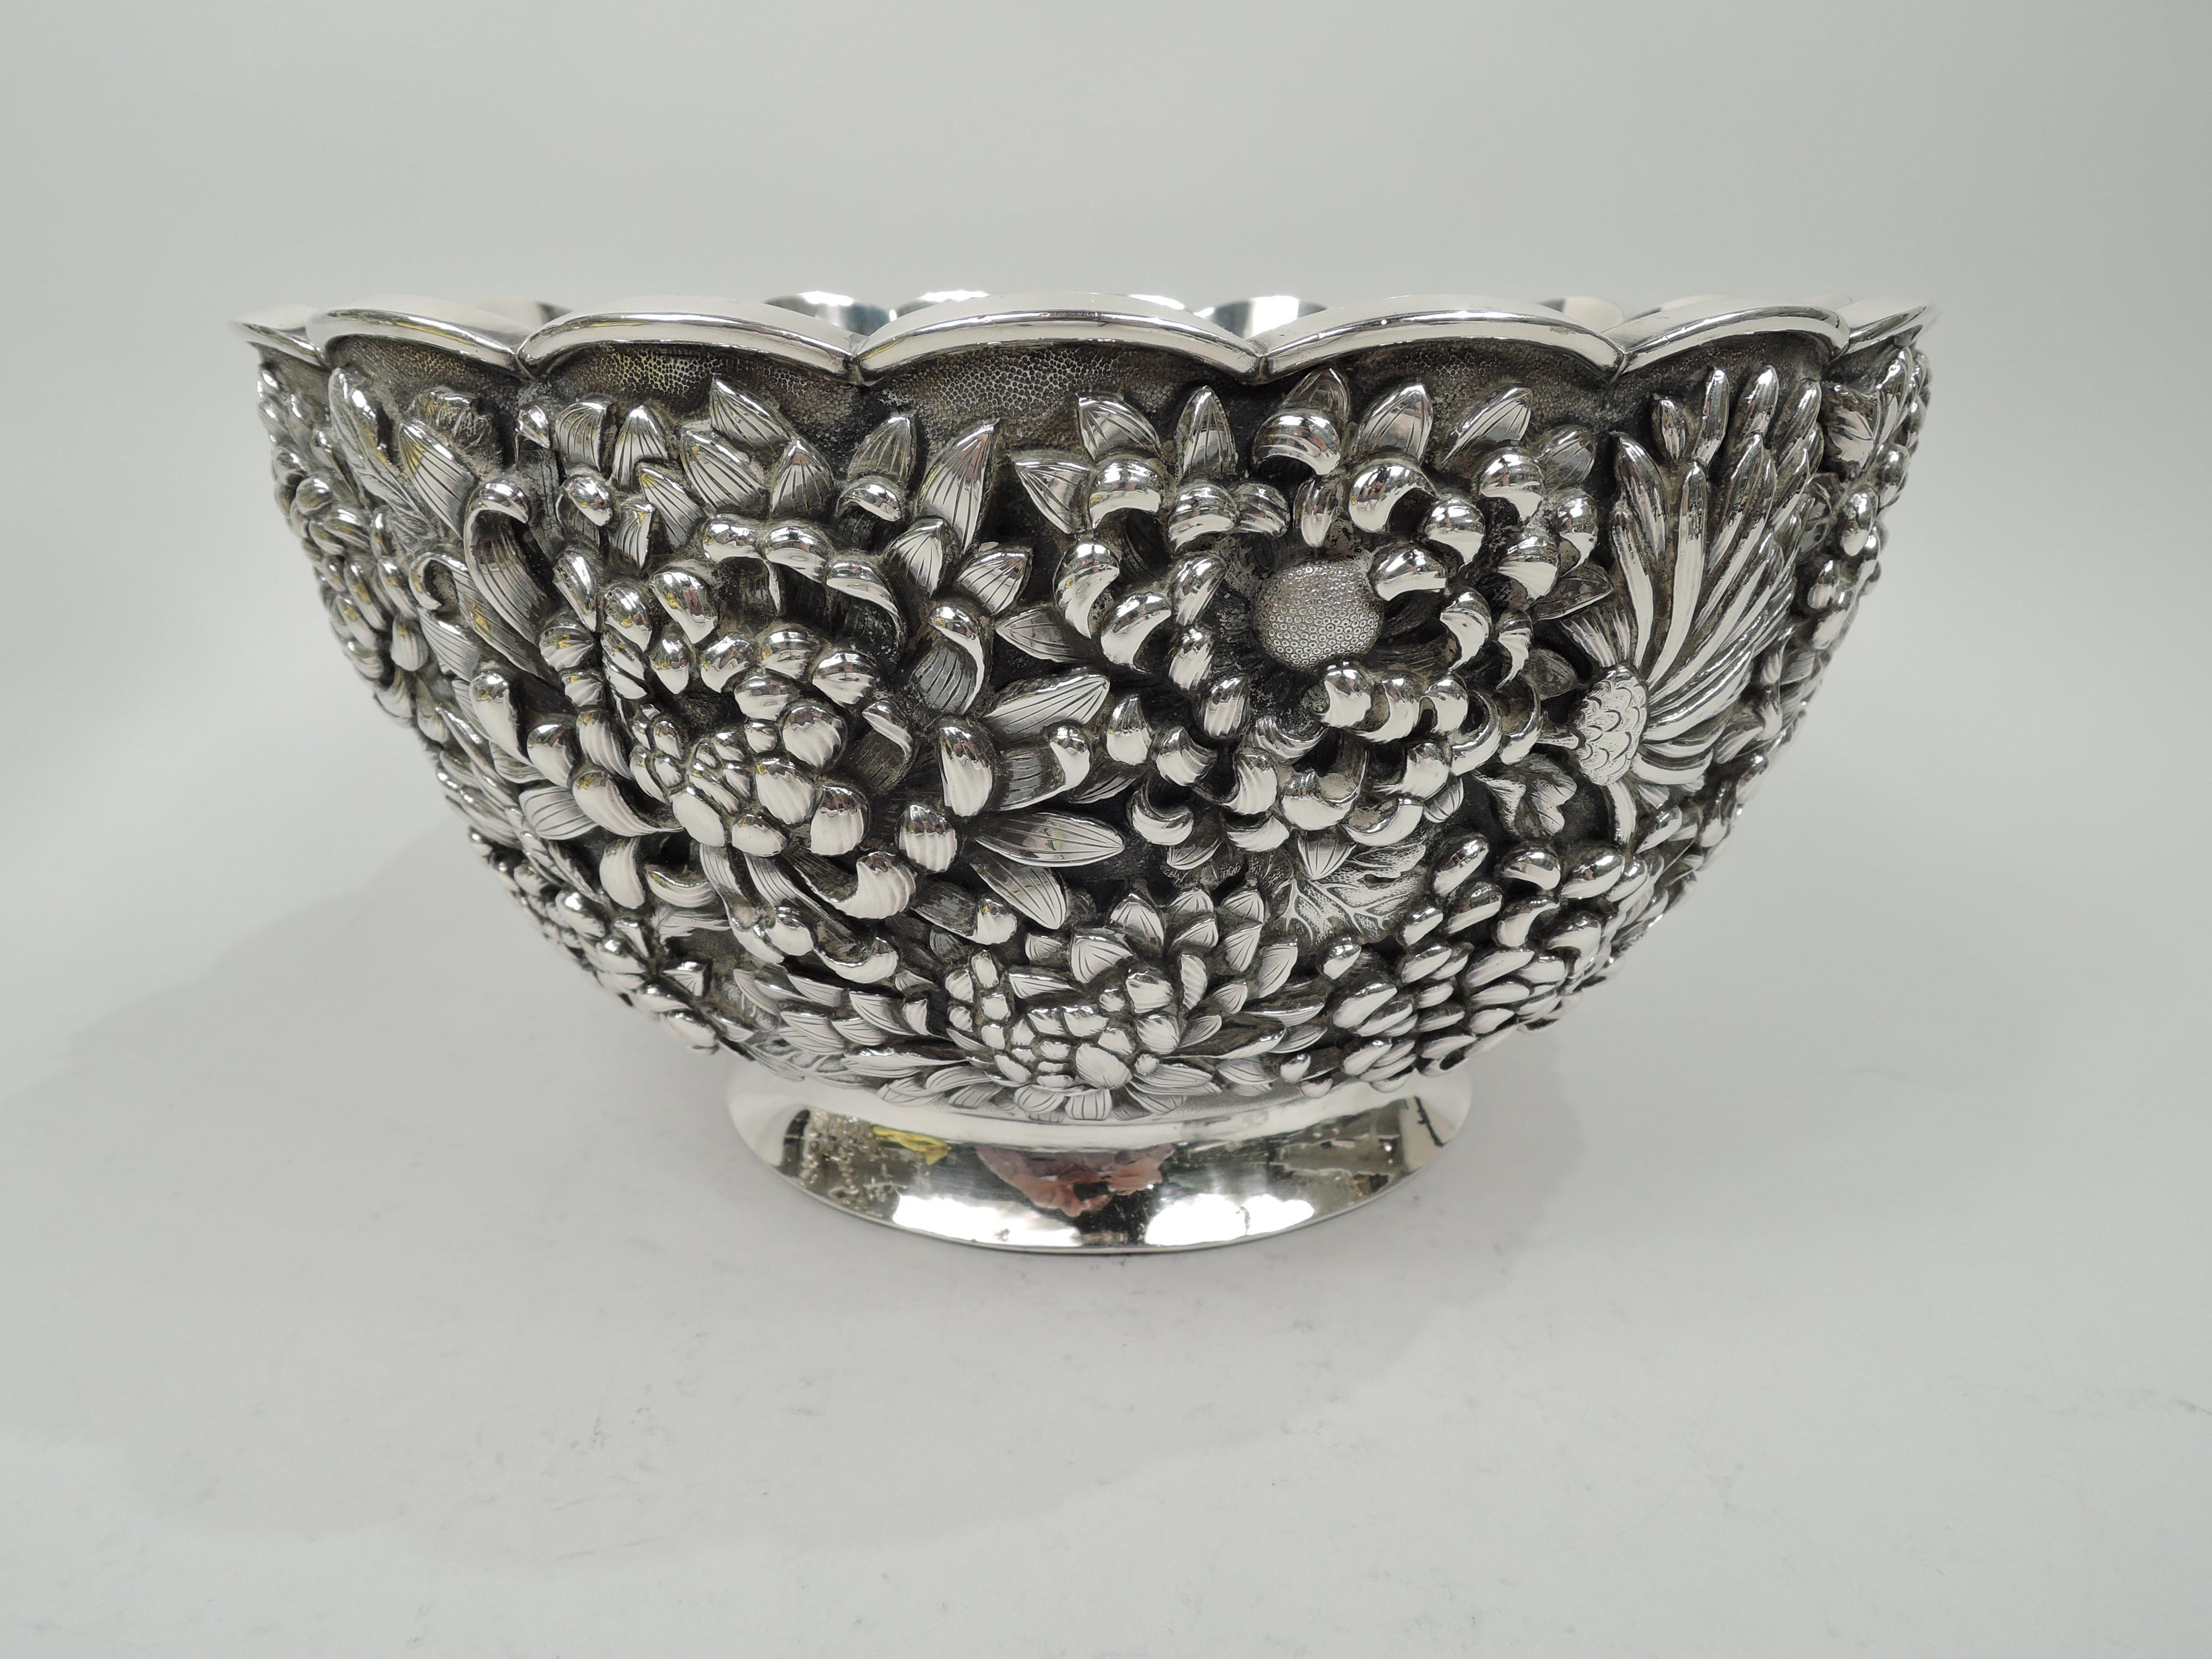 Large and striking Japanese Meiji silver bowl, circa 1890. Round with curved and tapering sides with dense and low relief Chrysanthemum flower heads with imbricated and tentacular petals. Plain scalloped rim and spread foot. Fluted double-walled